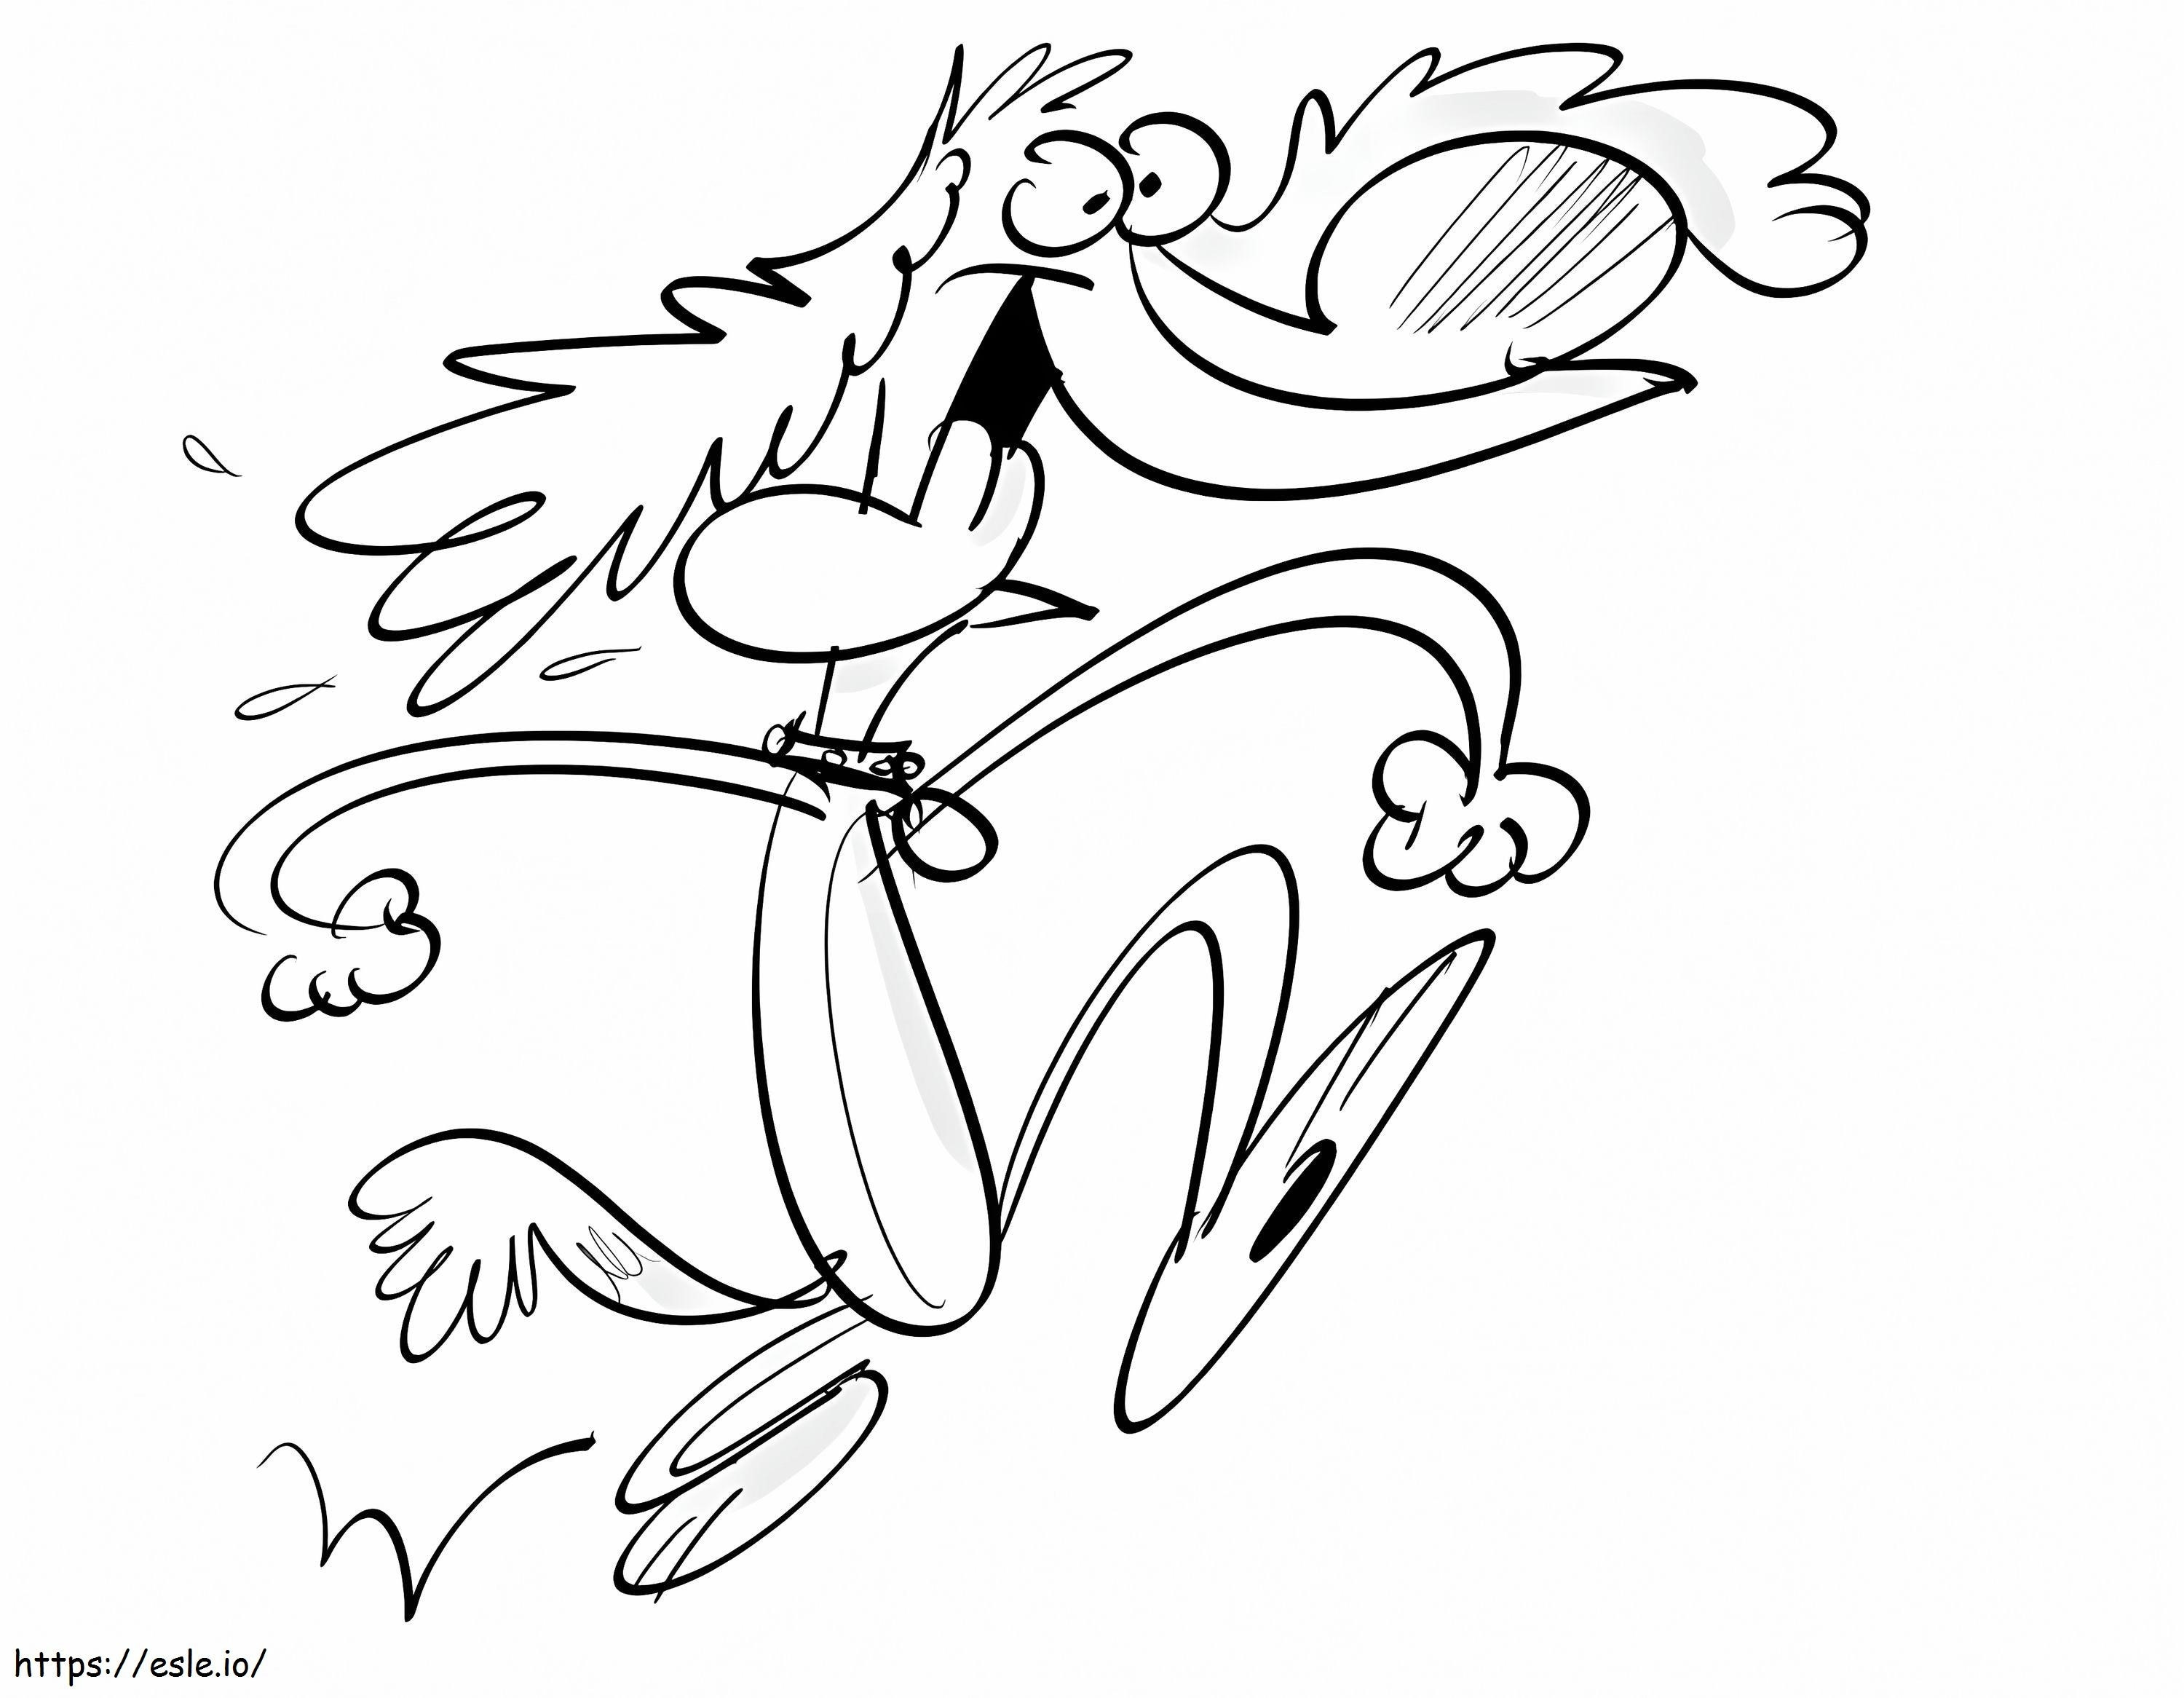 Hal The Dog From Nature Cat coloring page